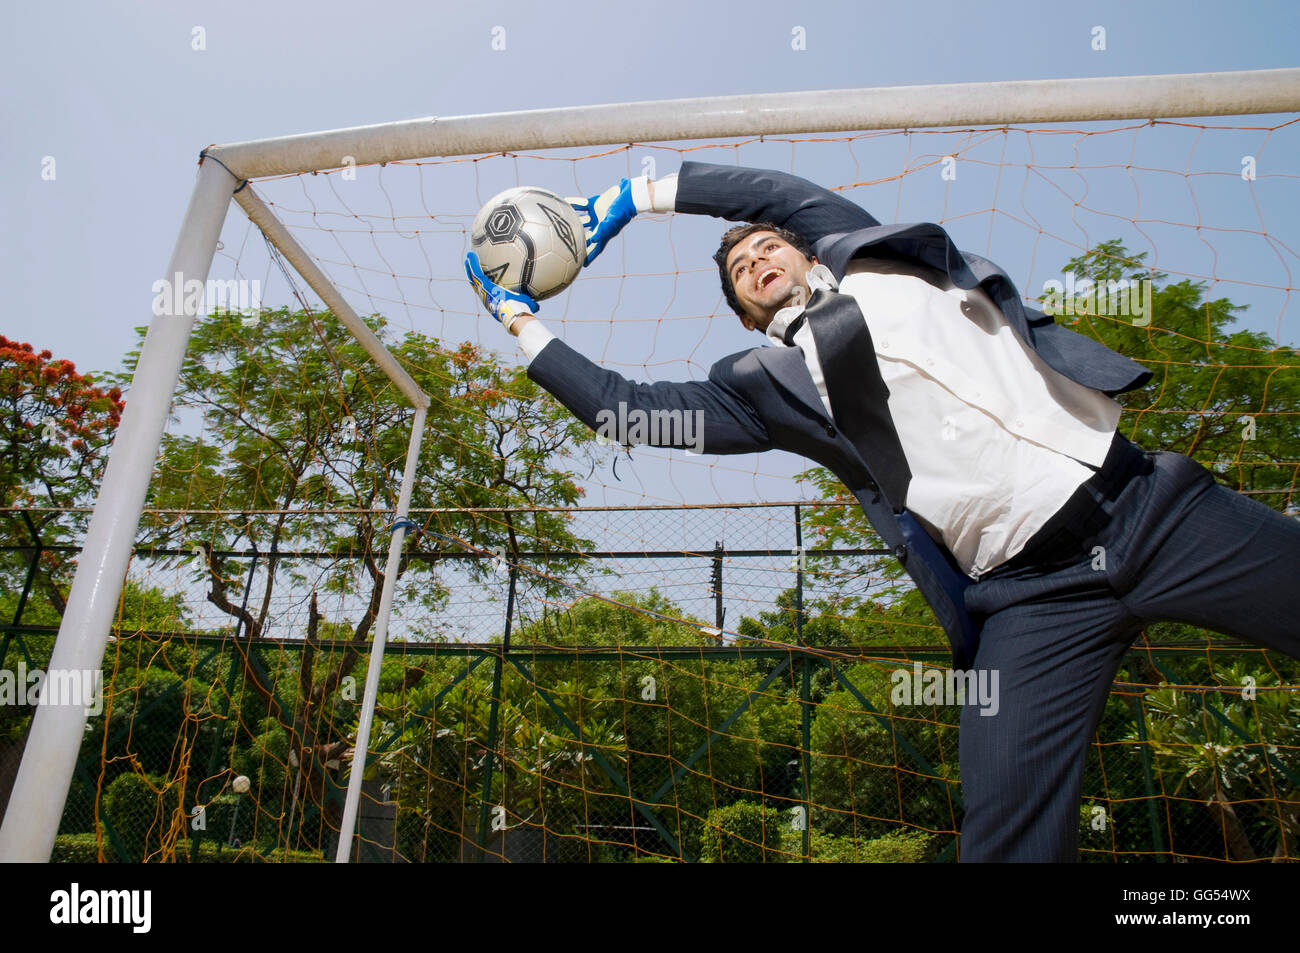 Saved a goal Stock Photo